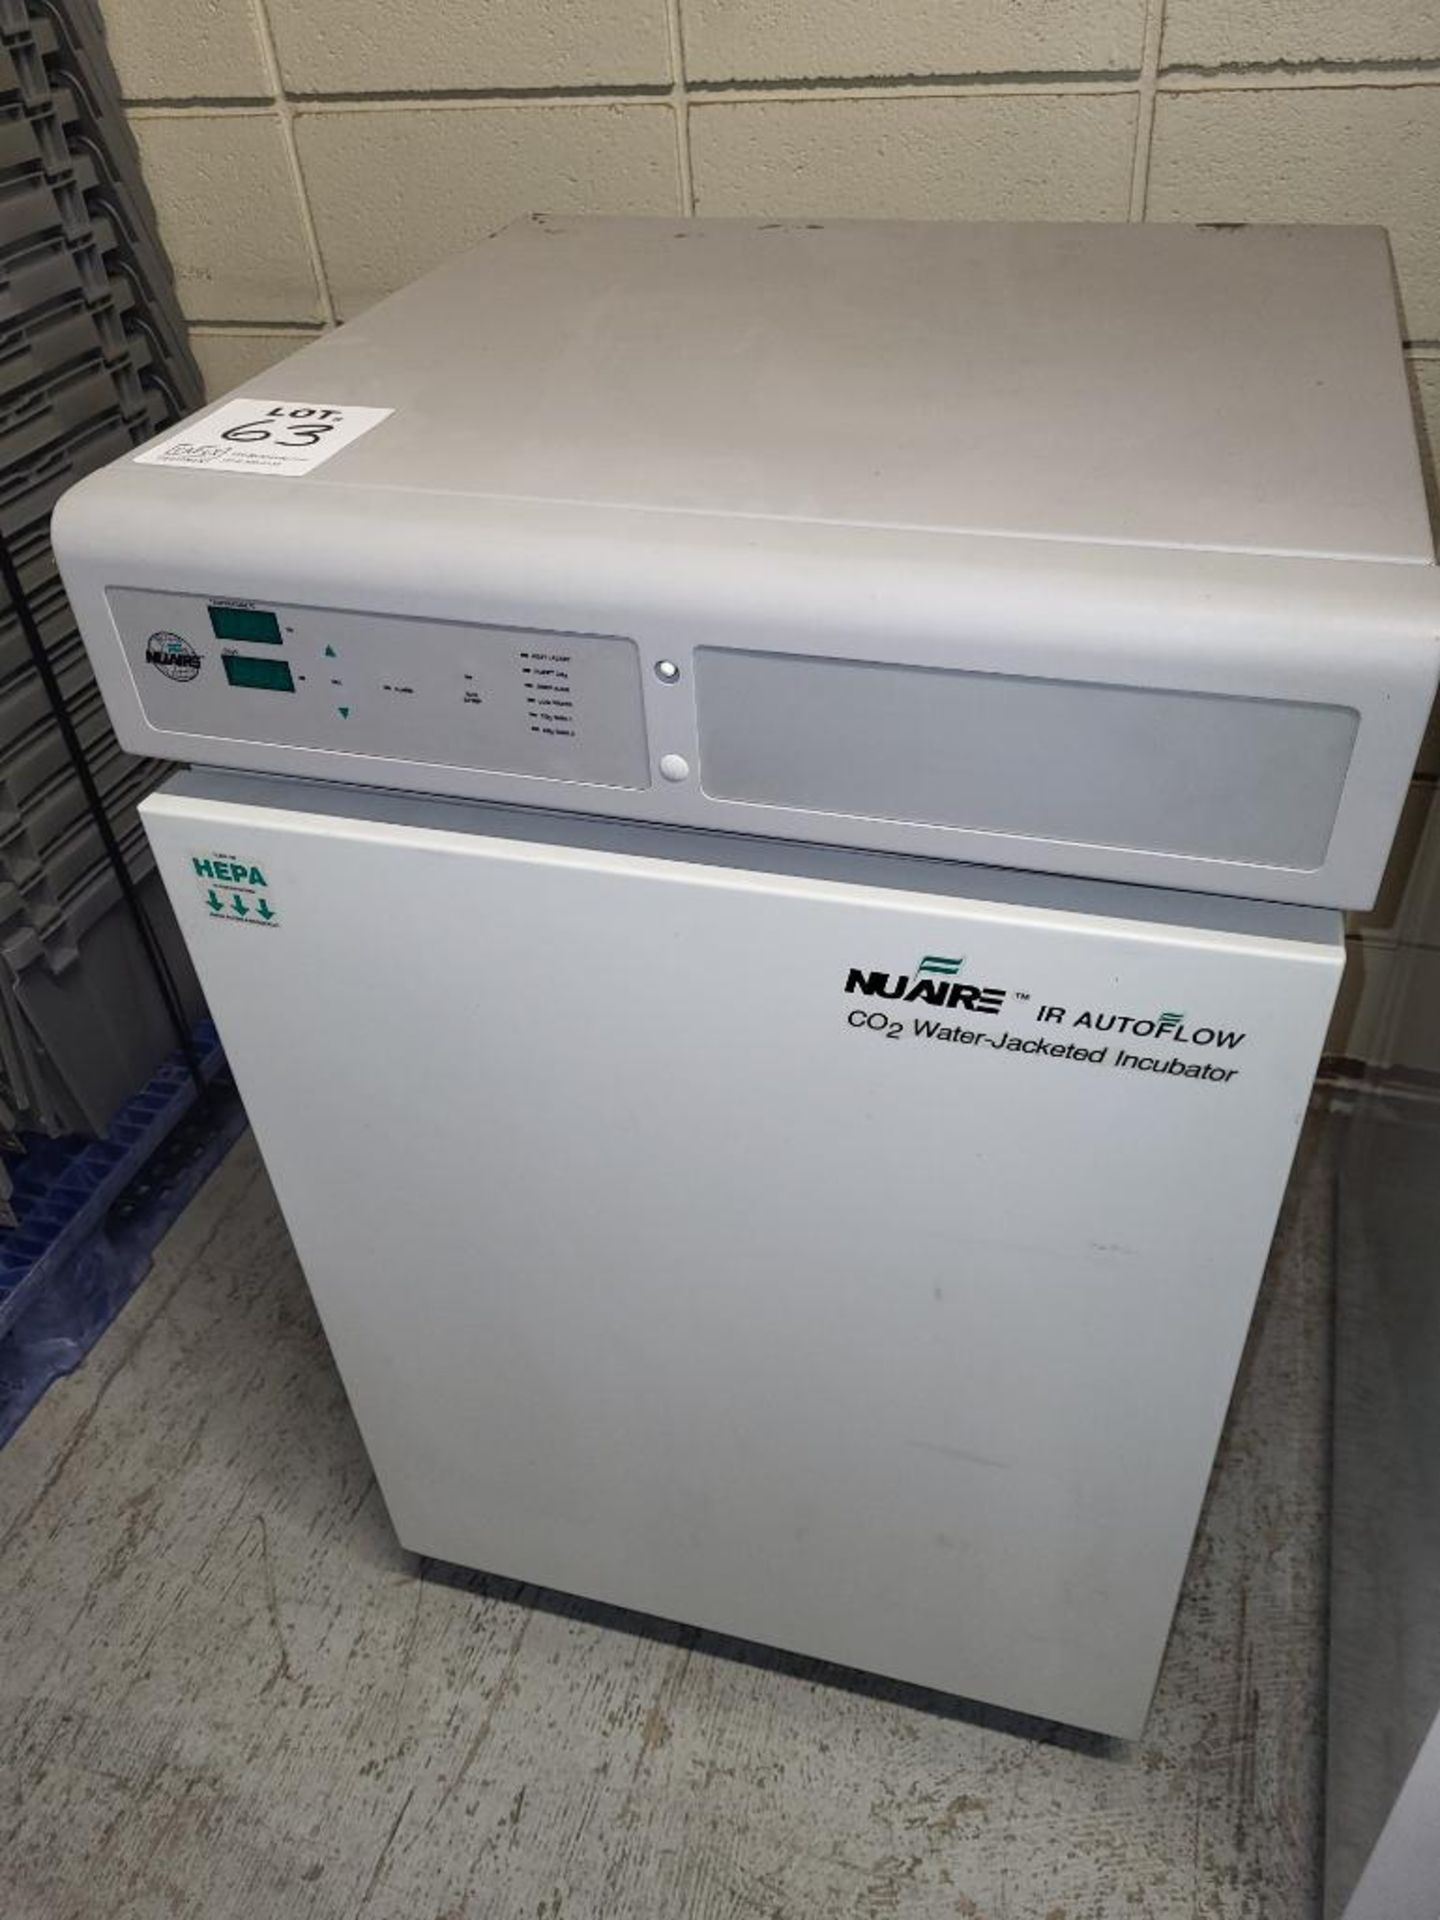 NUAIRE IR AUTOFLOW CO2 Water-Jacketed Incubator